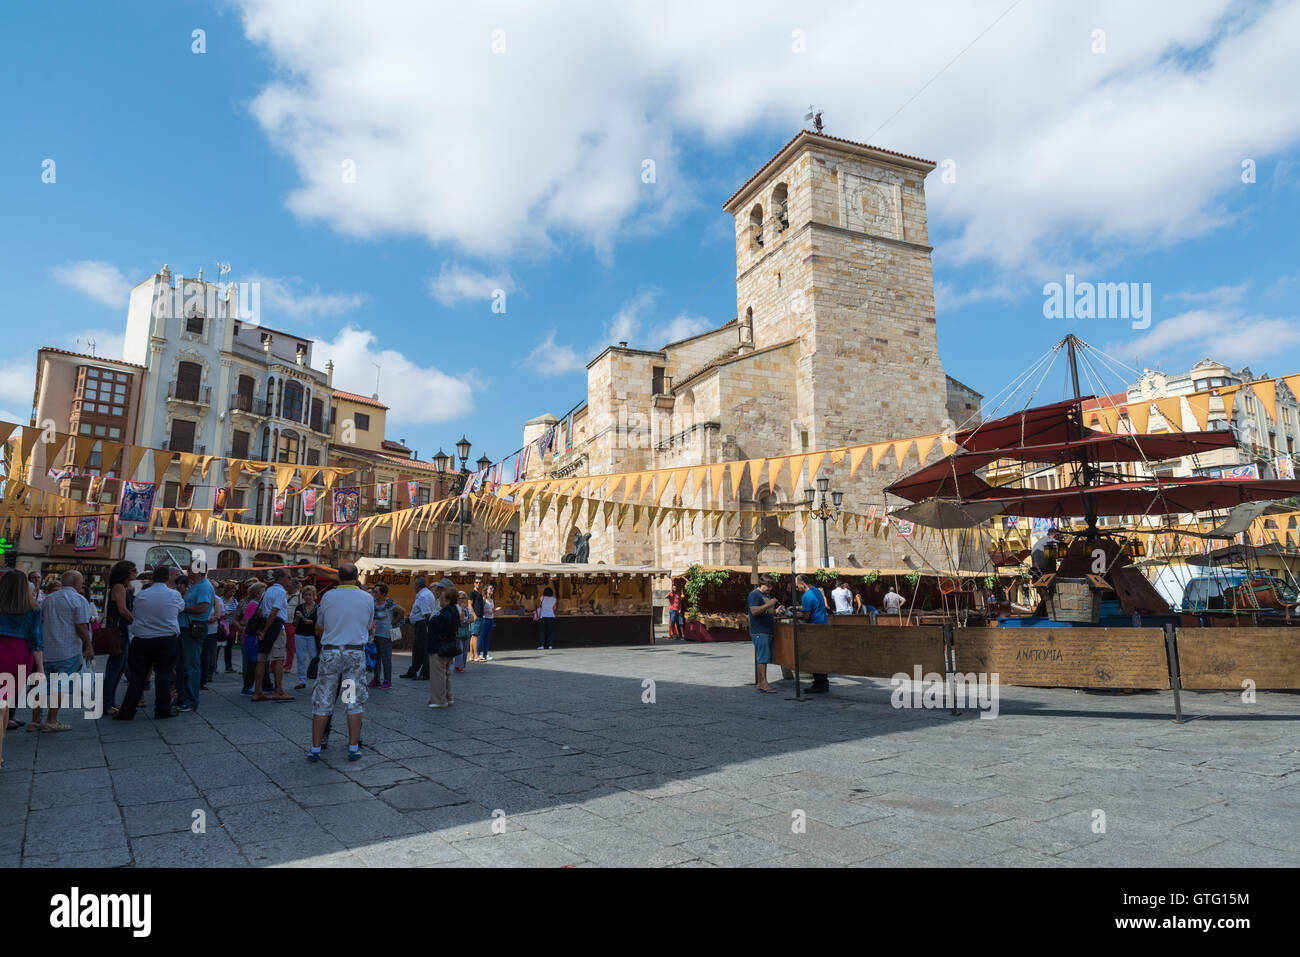 ZAMORA, SPAIN - SEPTEMBER 9, 2016: People in the main square of Zamora during the recreation of a medieval market Stock Photo